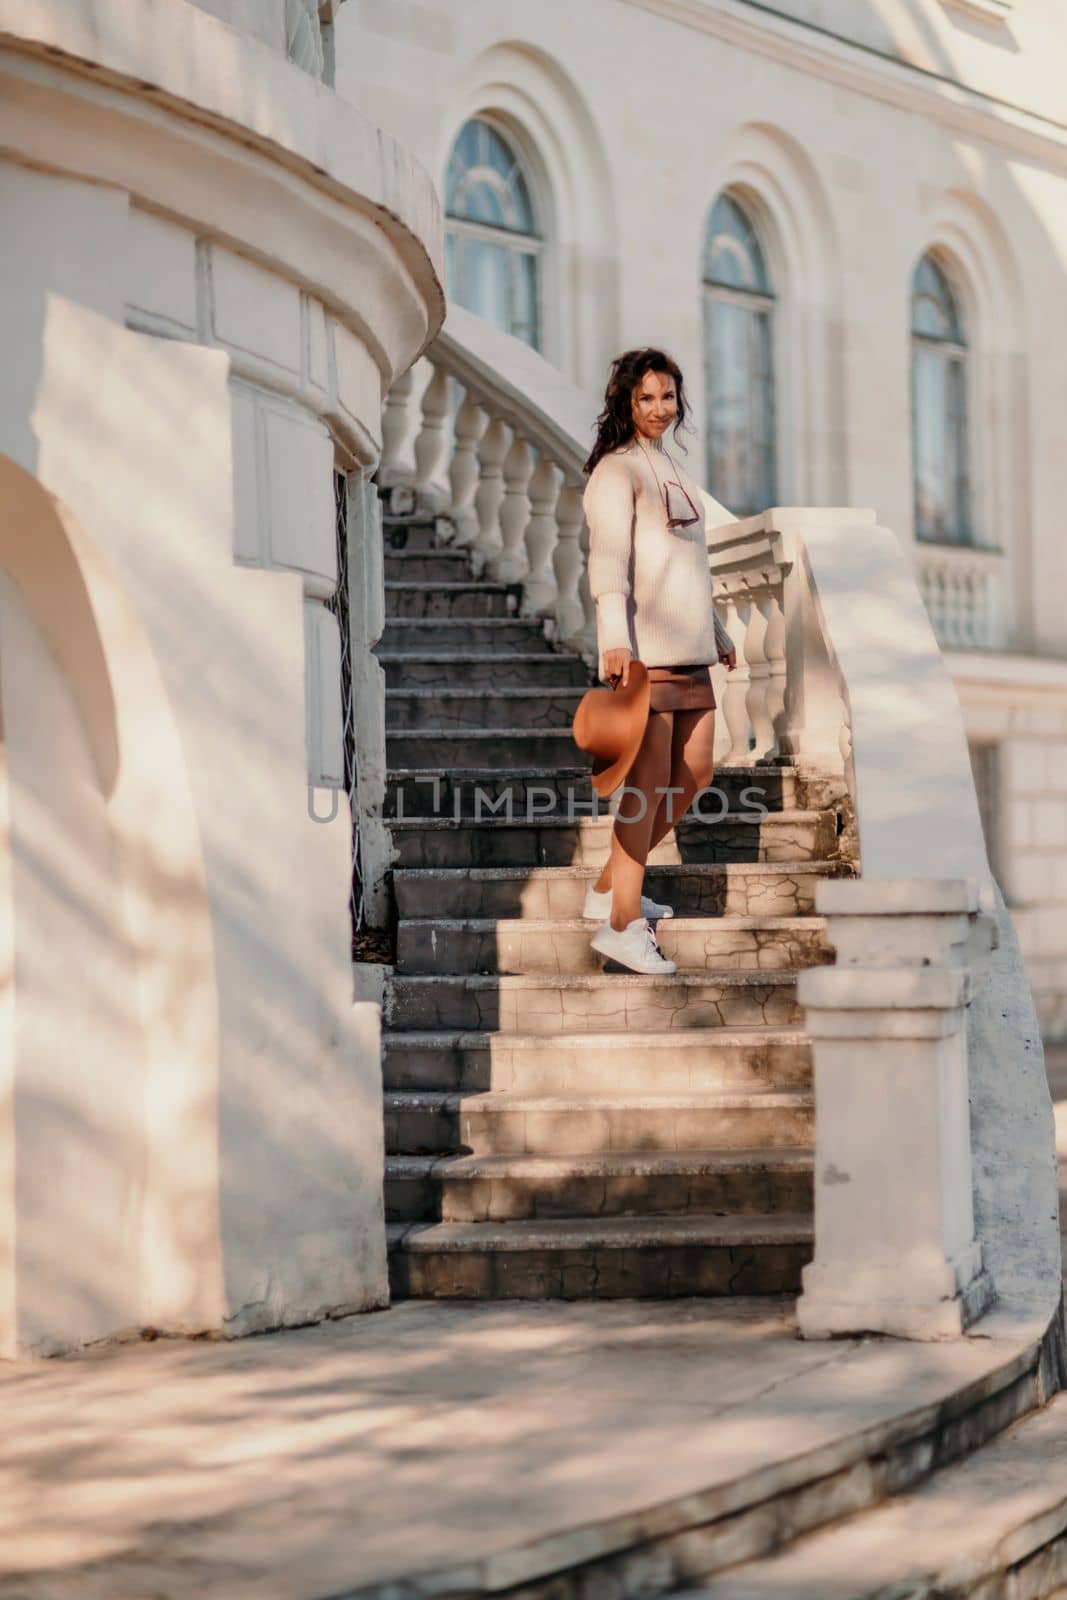 Woman walks in the city, lifestyle. Young beautiful woman in a loose light sweater, brown skirt and sneakers with a hat